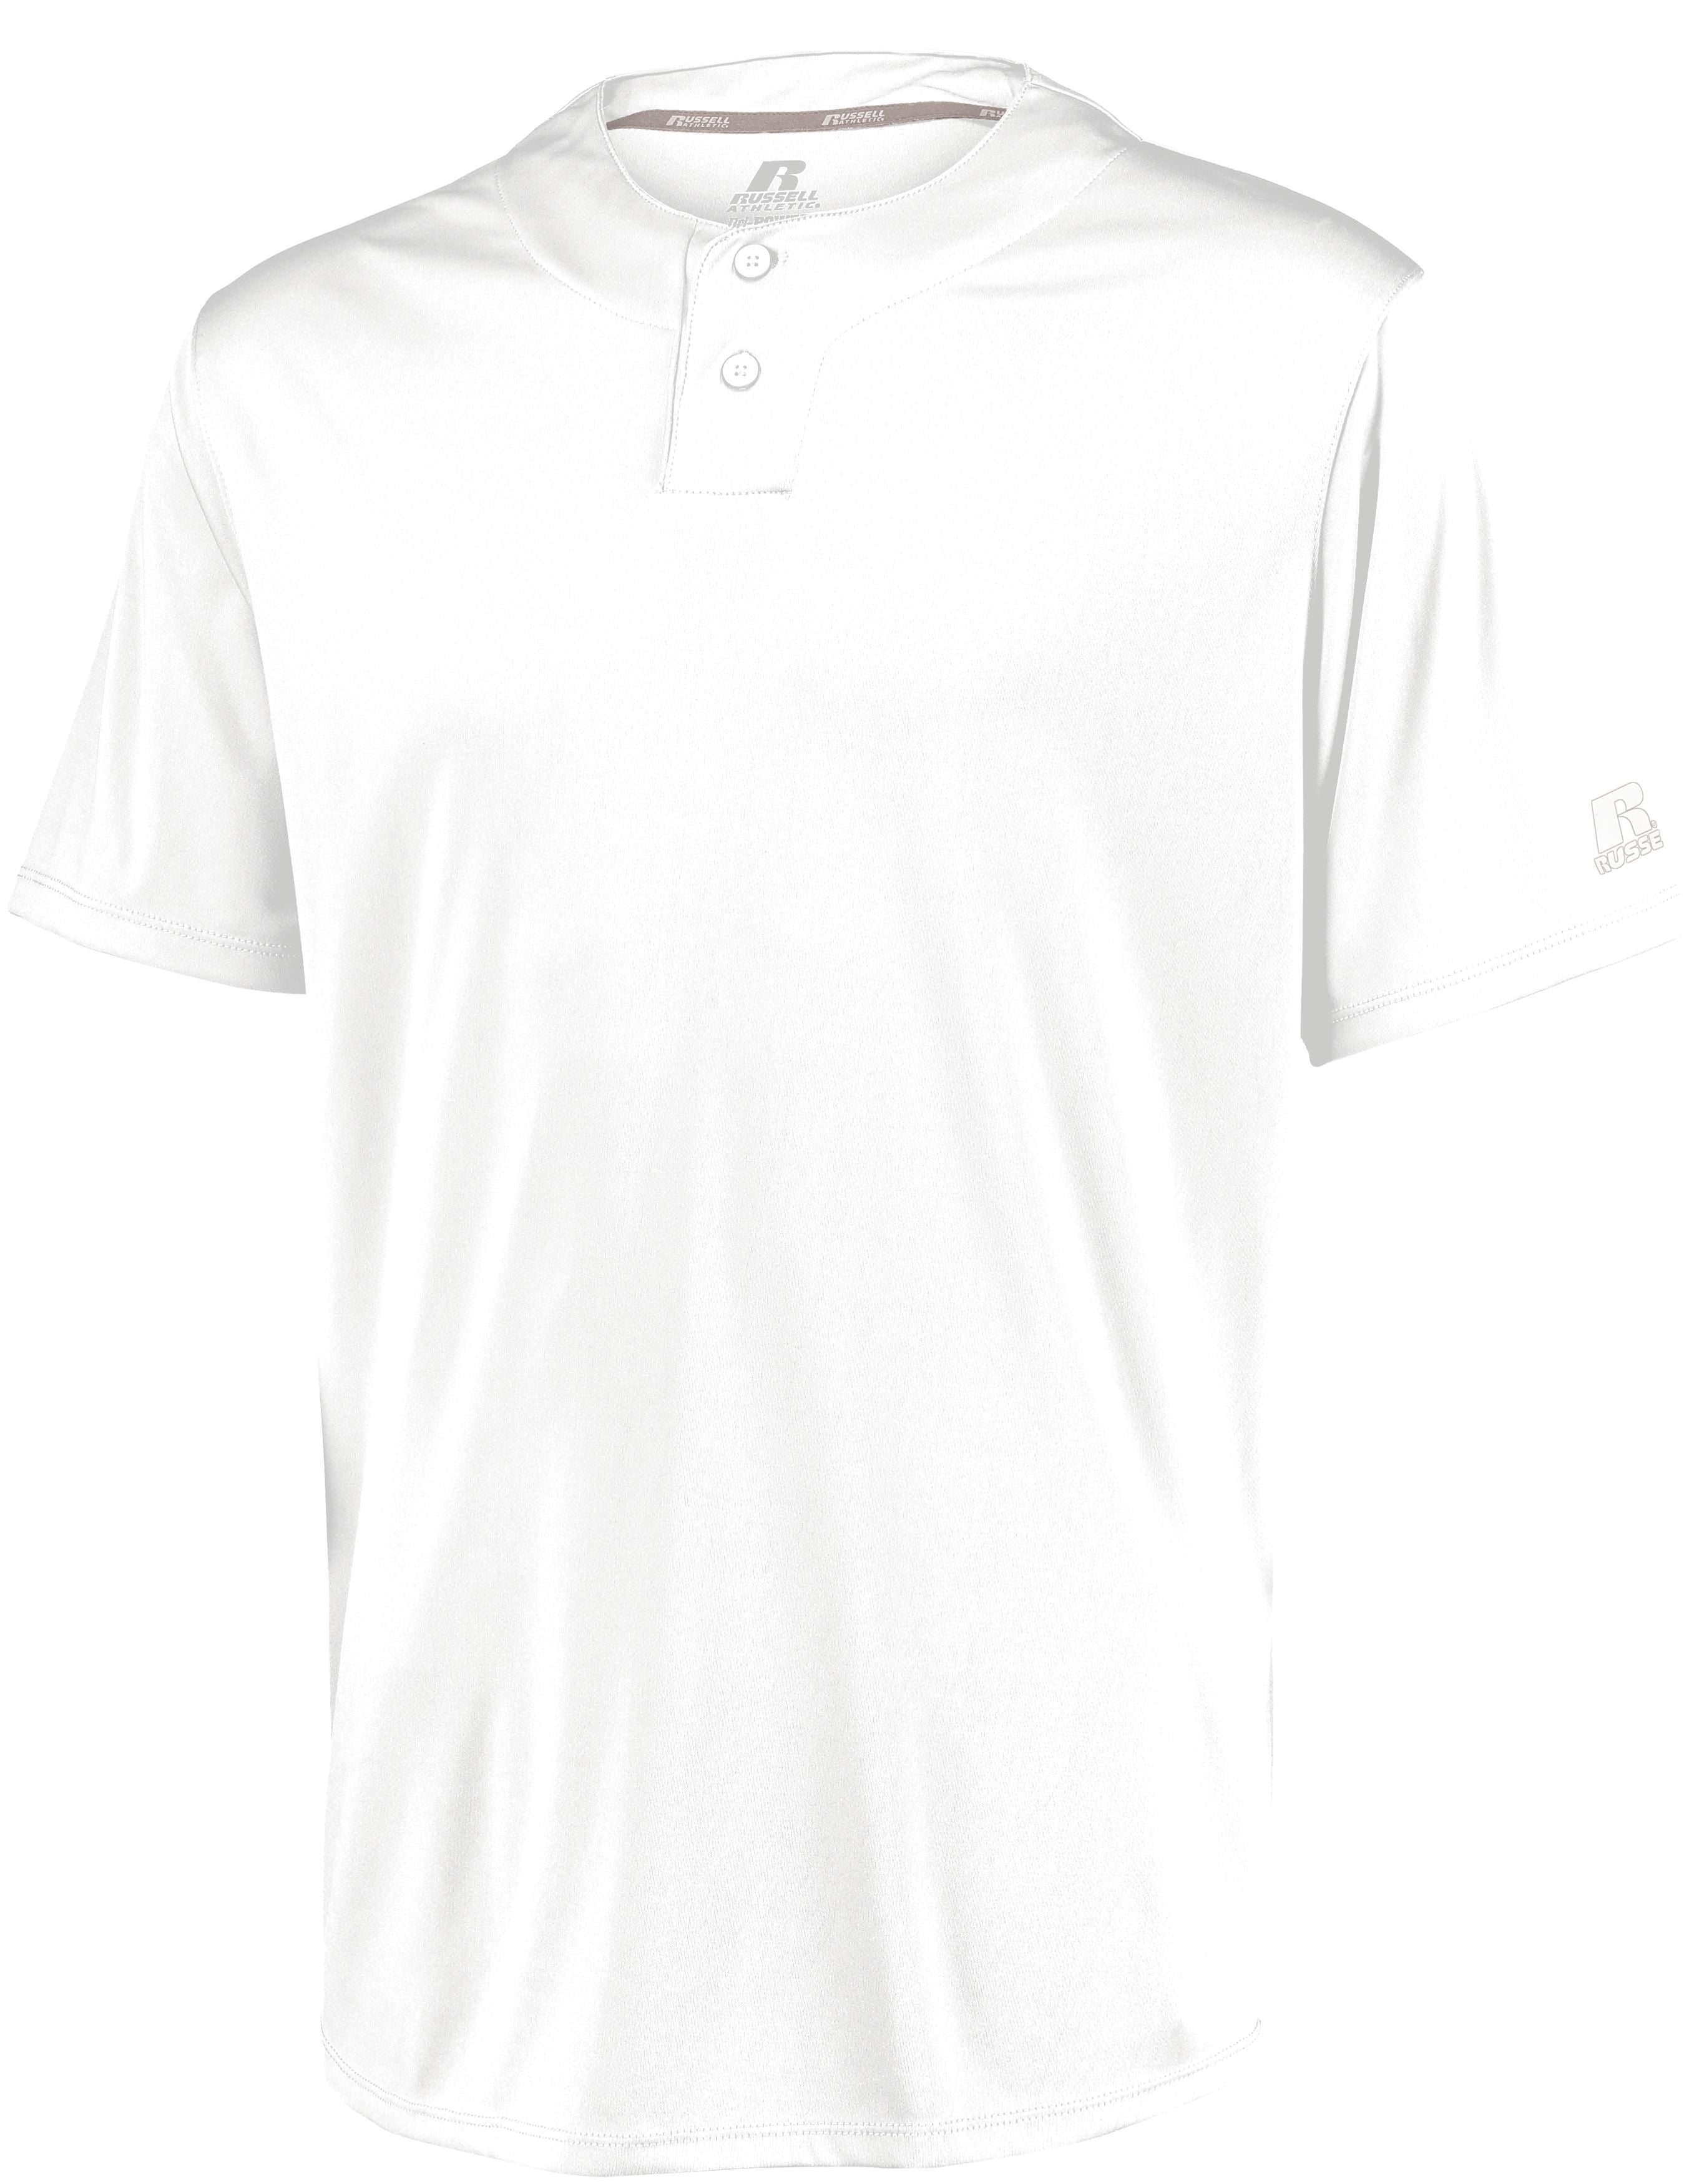 Russell Athletic Performance Two-Button Solid Jersey in White  -Part of the Adult, Adult-Jersey, Baseball, Russell-Athletic-Products, Shirts, All-Sports, All-Sports-1 product lines at KanaleyCreations.com